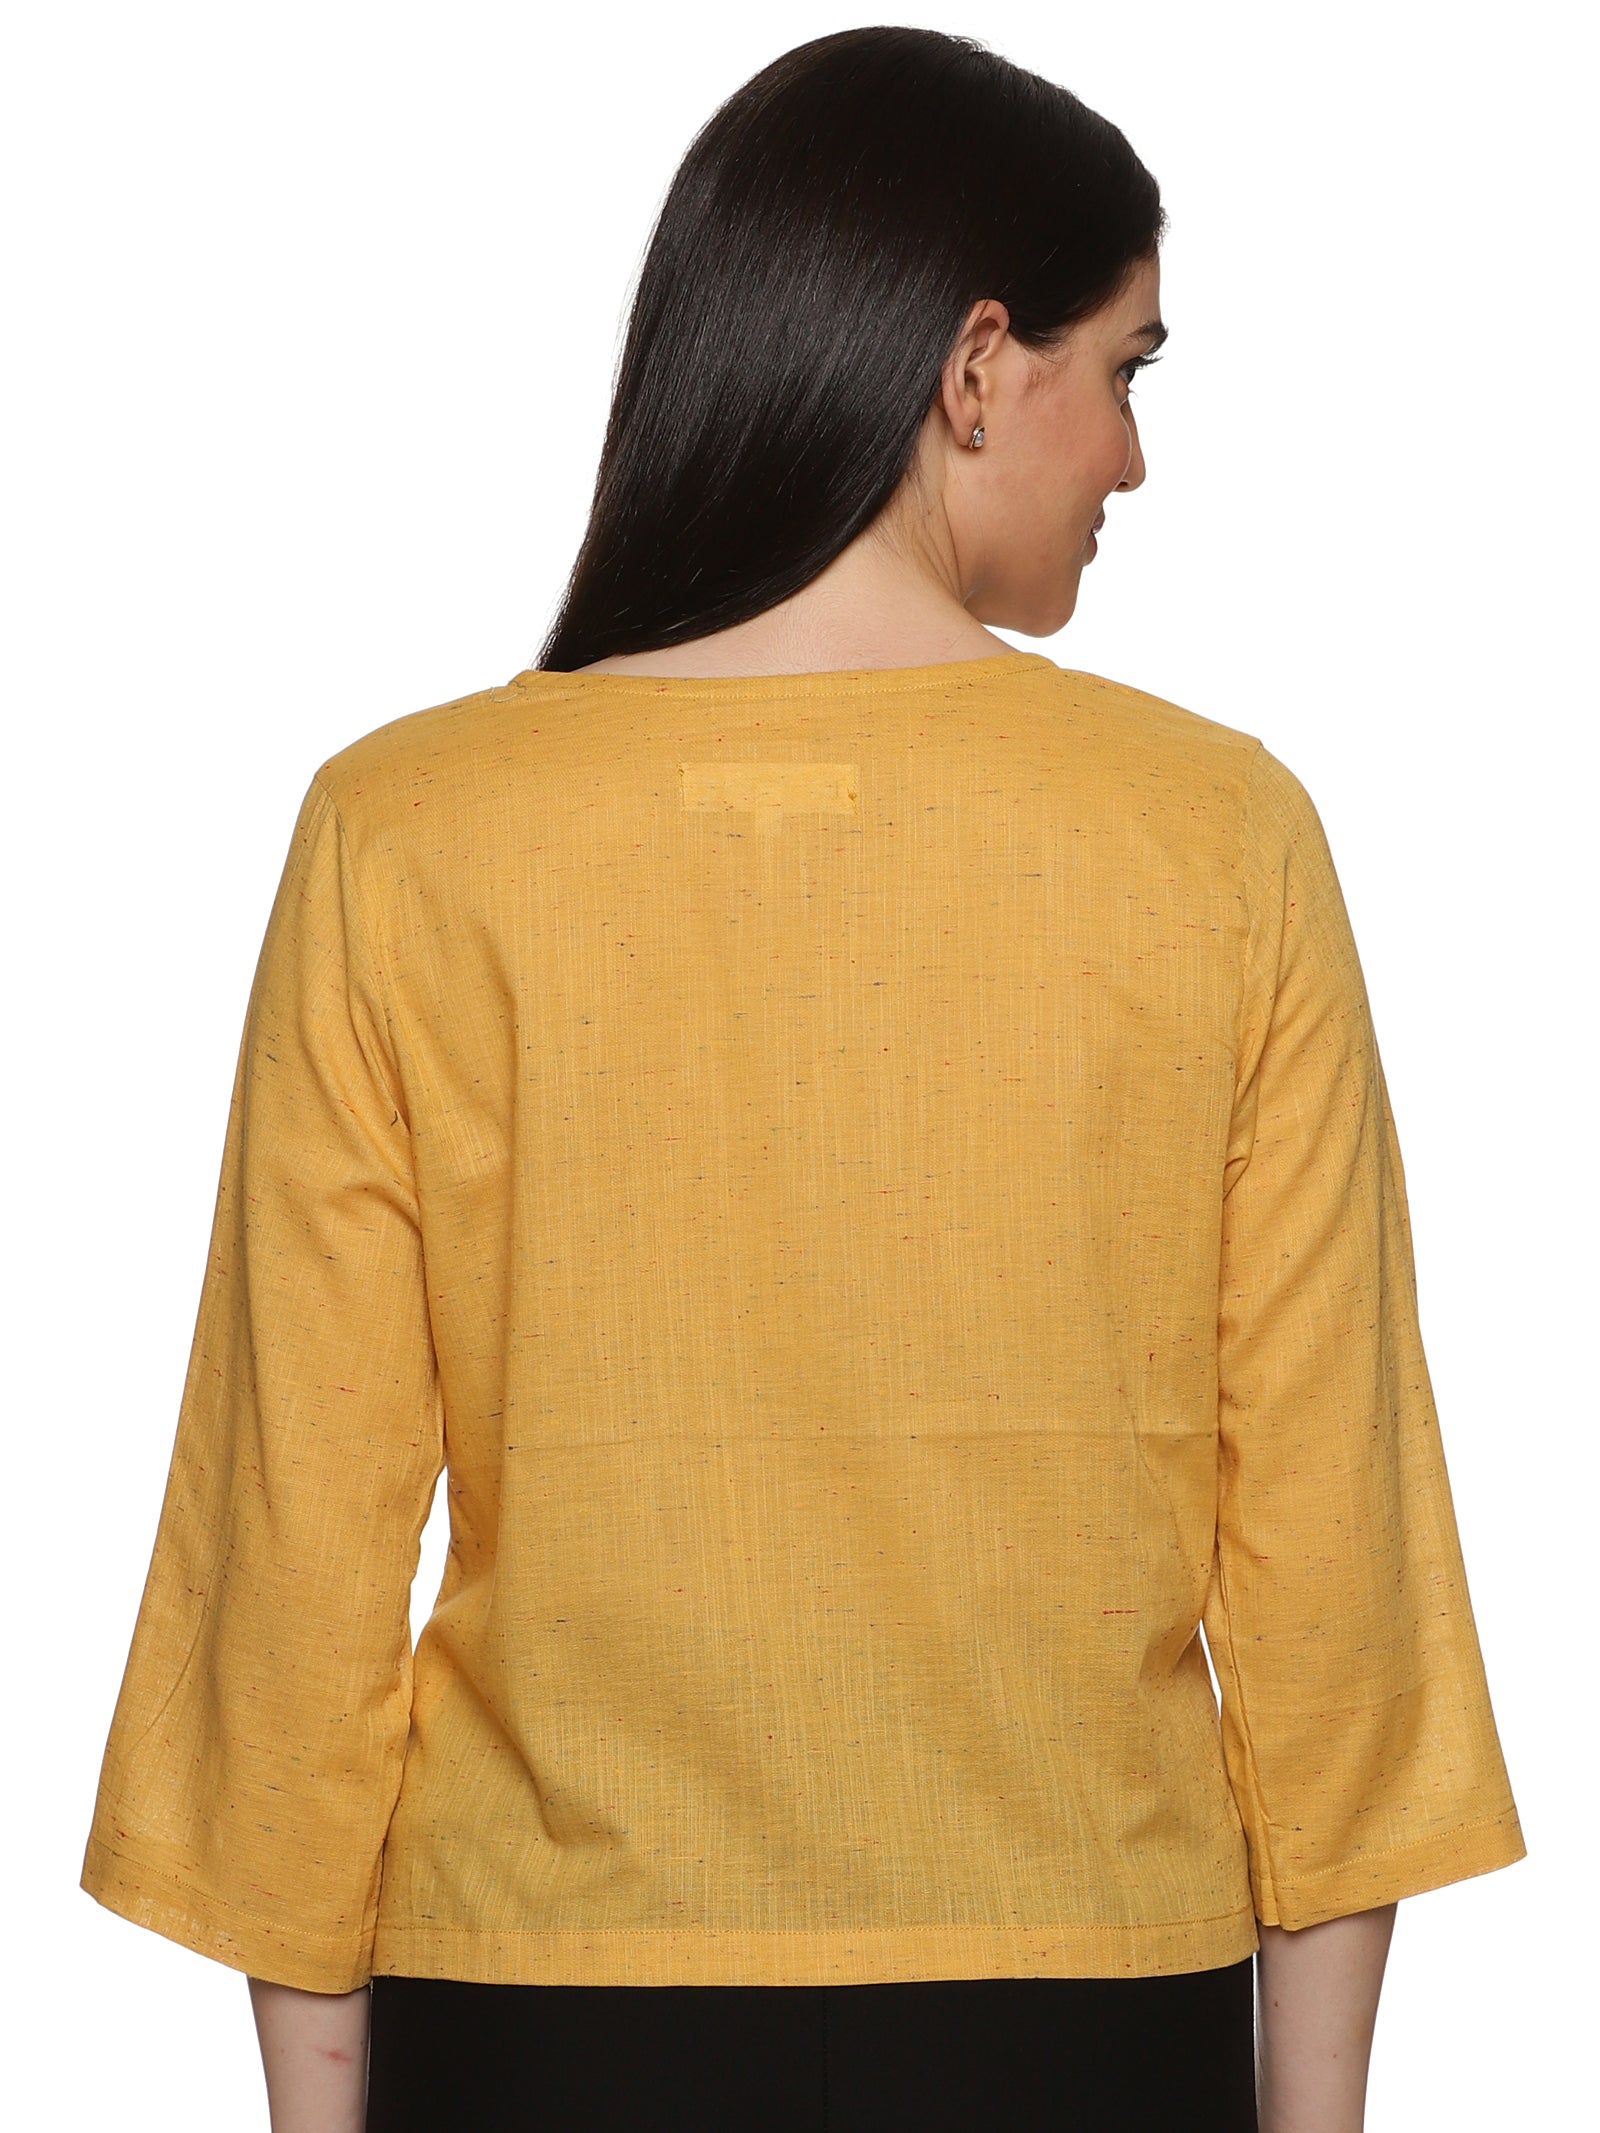 A beautiful back view of lady in Mustard Asymmetric Neck Side Button Top, womens workwear